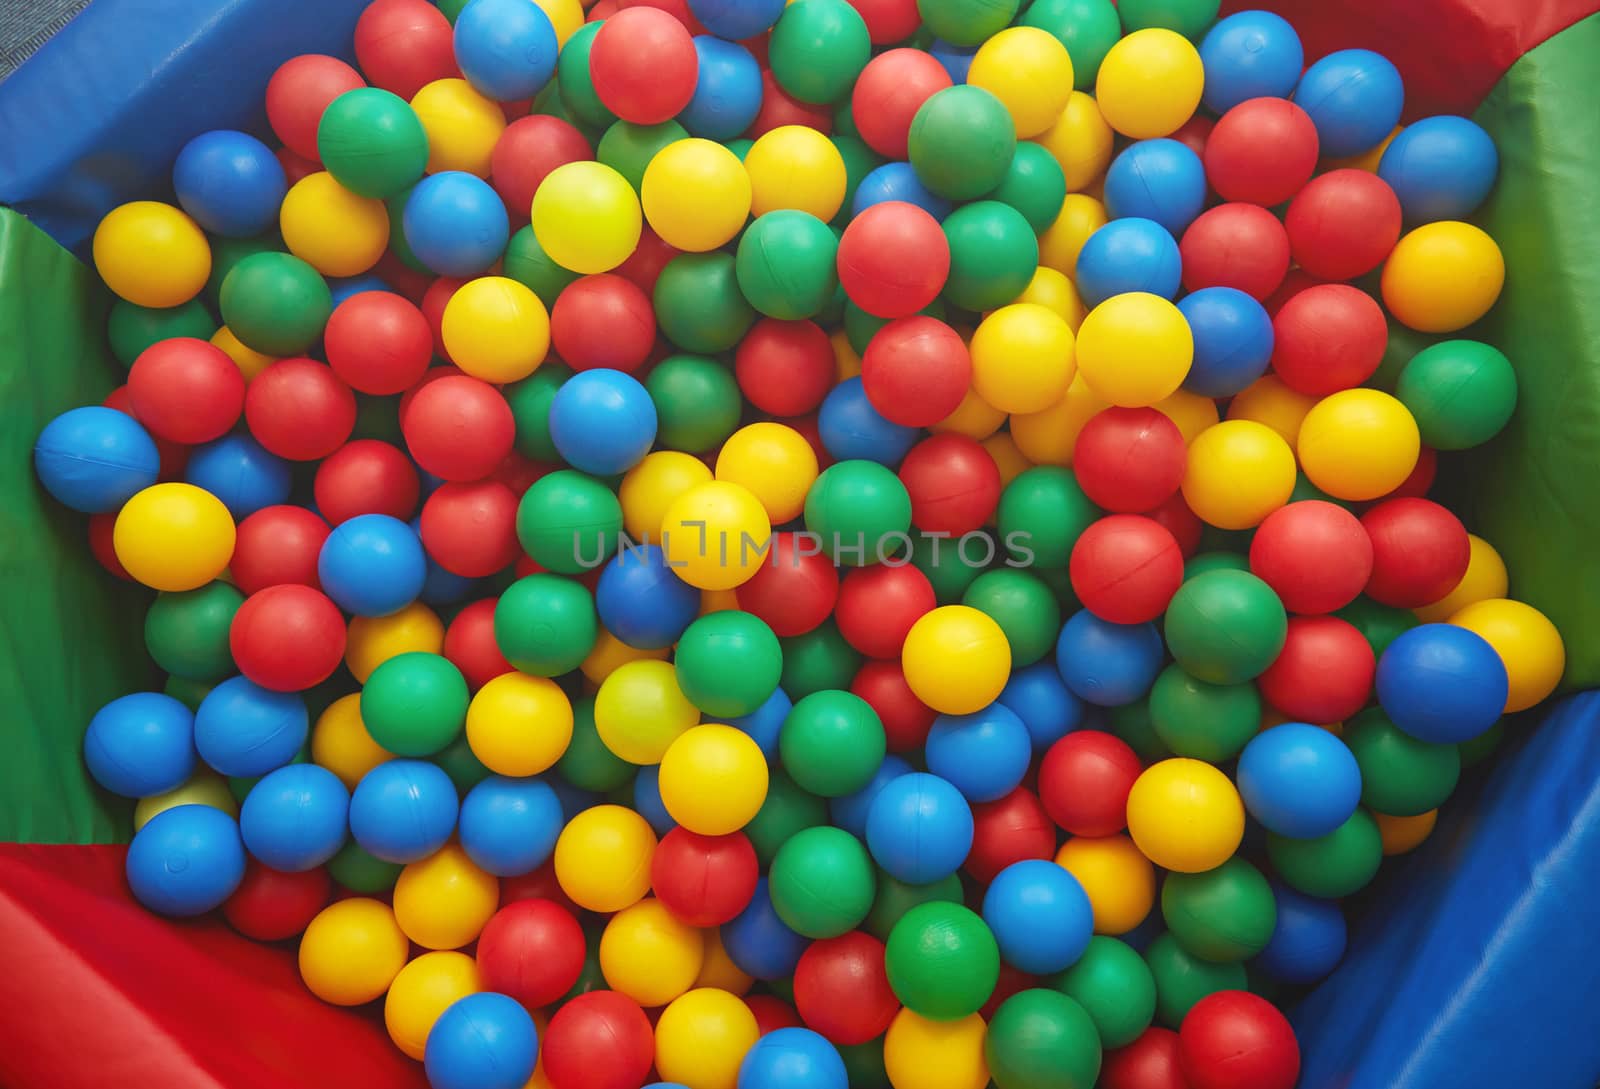 Group of many multicolored plastic balls. Close-up view